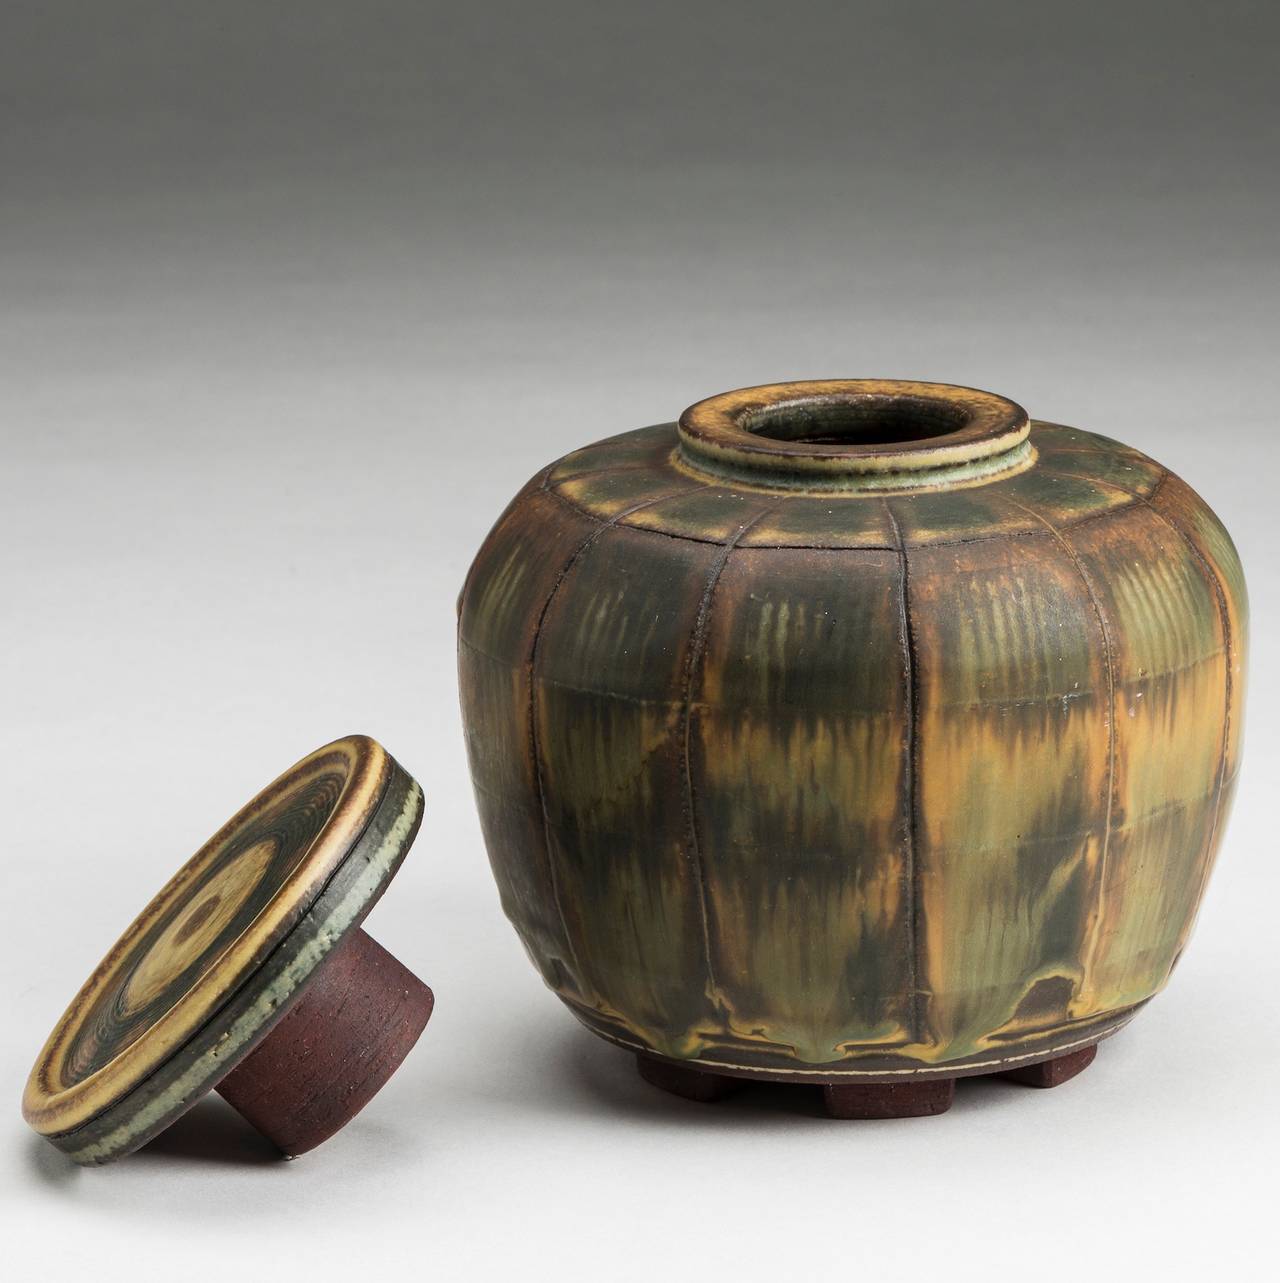 This lidded urn comes from the Birgit Nilsson Farsta collection.
Art historians and collectors today consider the Farsta pieces the culmination of Wilhelm Kåge’s artistic production.
Height 14 cm.